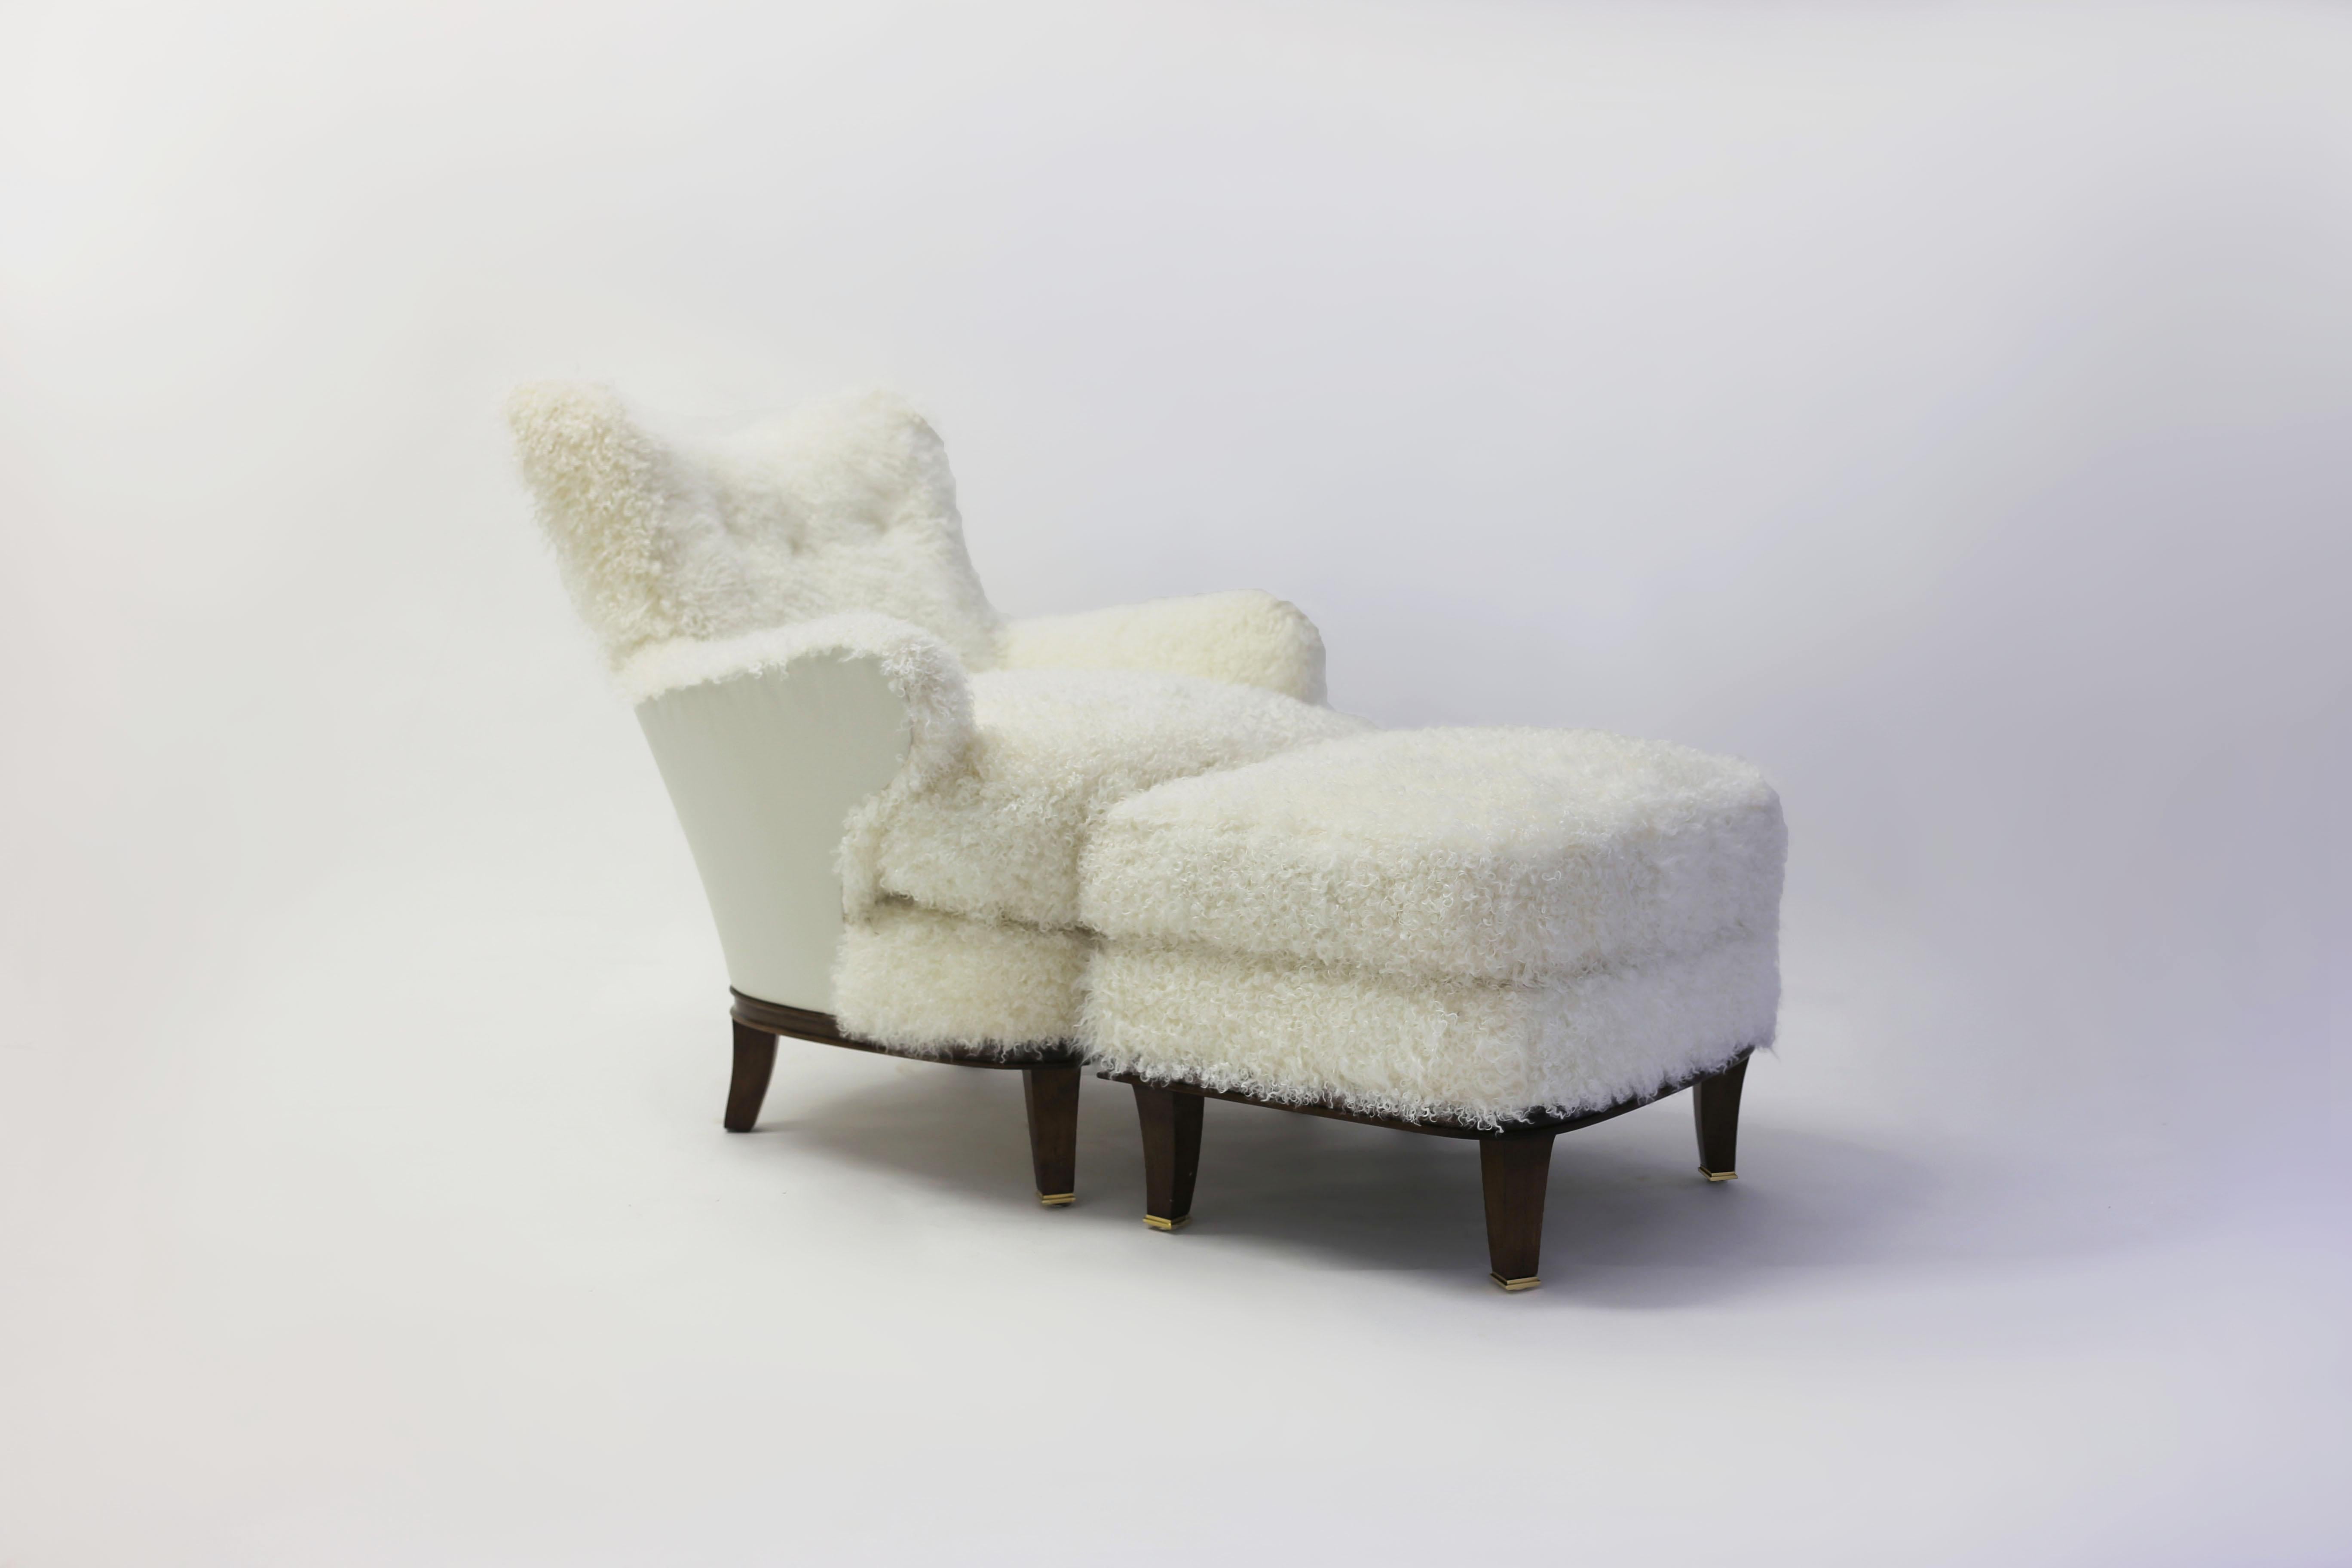 Hand-Carved Shearling Covered Shaped Back Chair with Wood Base and Legs with Metal Cap Feet  For Sale